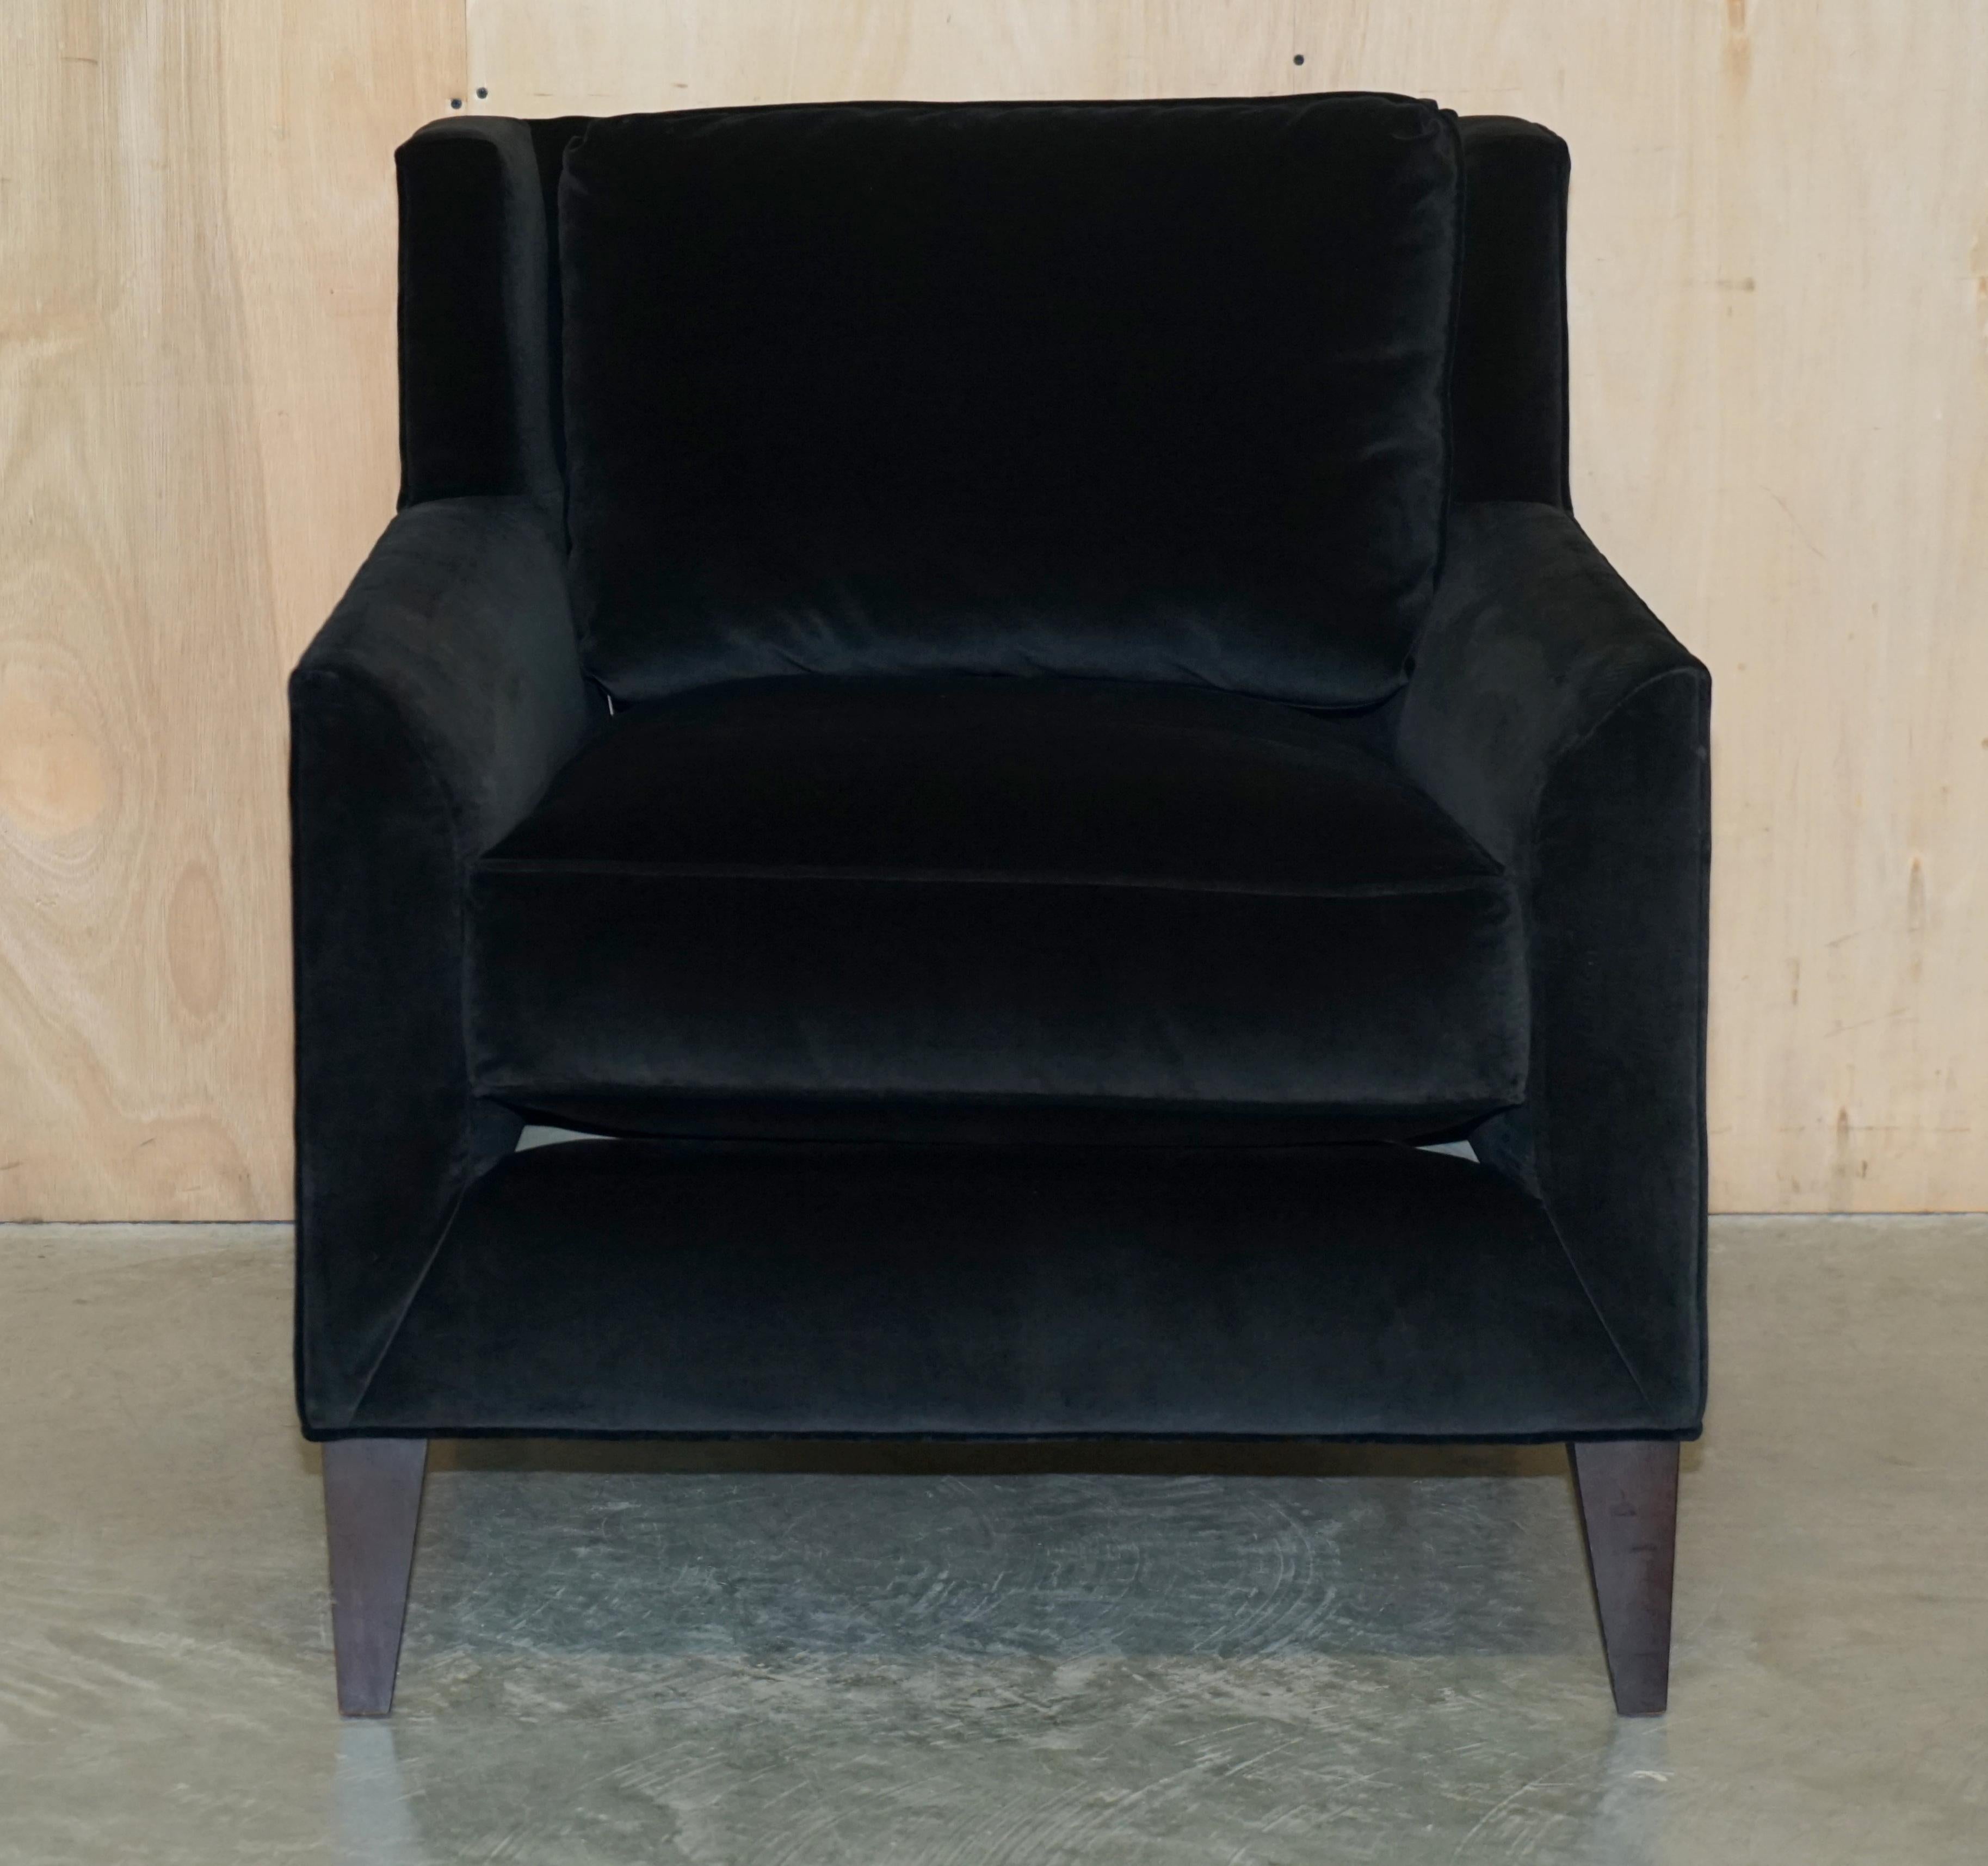 We are delighted to offer for sale this perfect condition, Ex-display, Ralph Lauren Black Nero Velvet Art Deco style club armchair RRP £7,900

A lovely looking and well-made armchair in retail new perfect condition so far as I can see, we bought